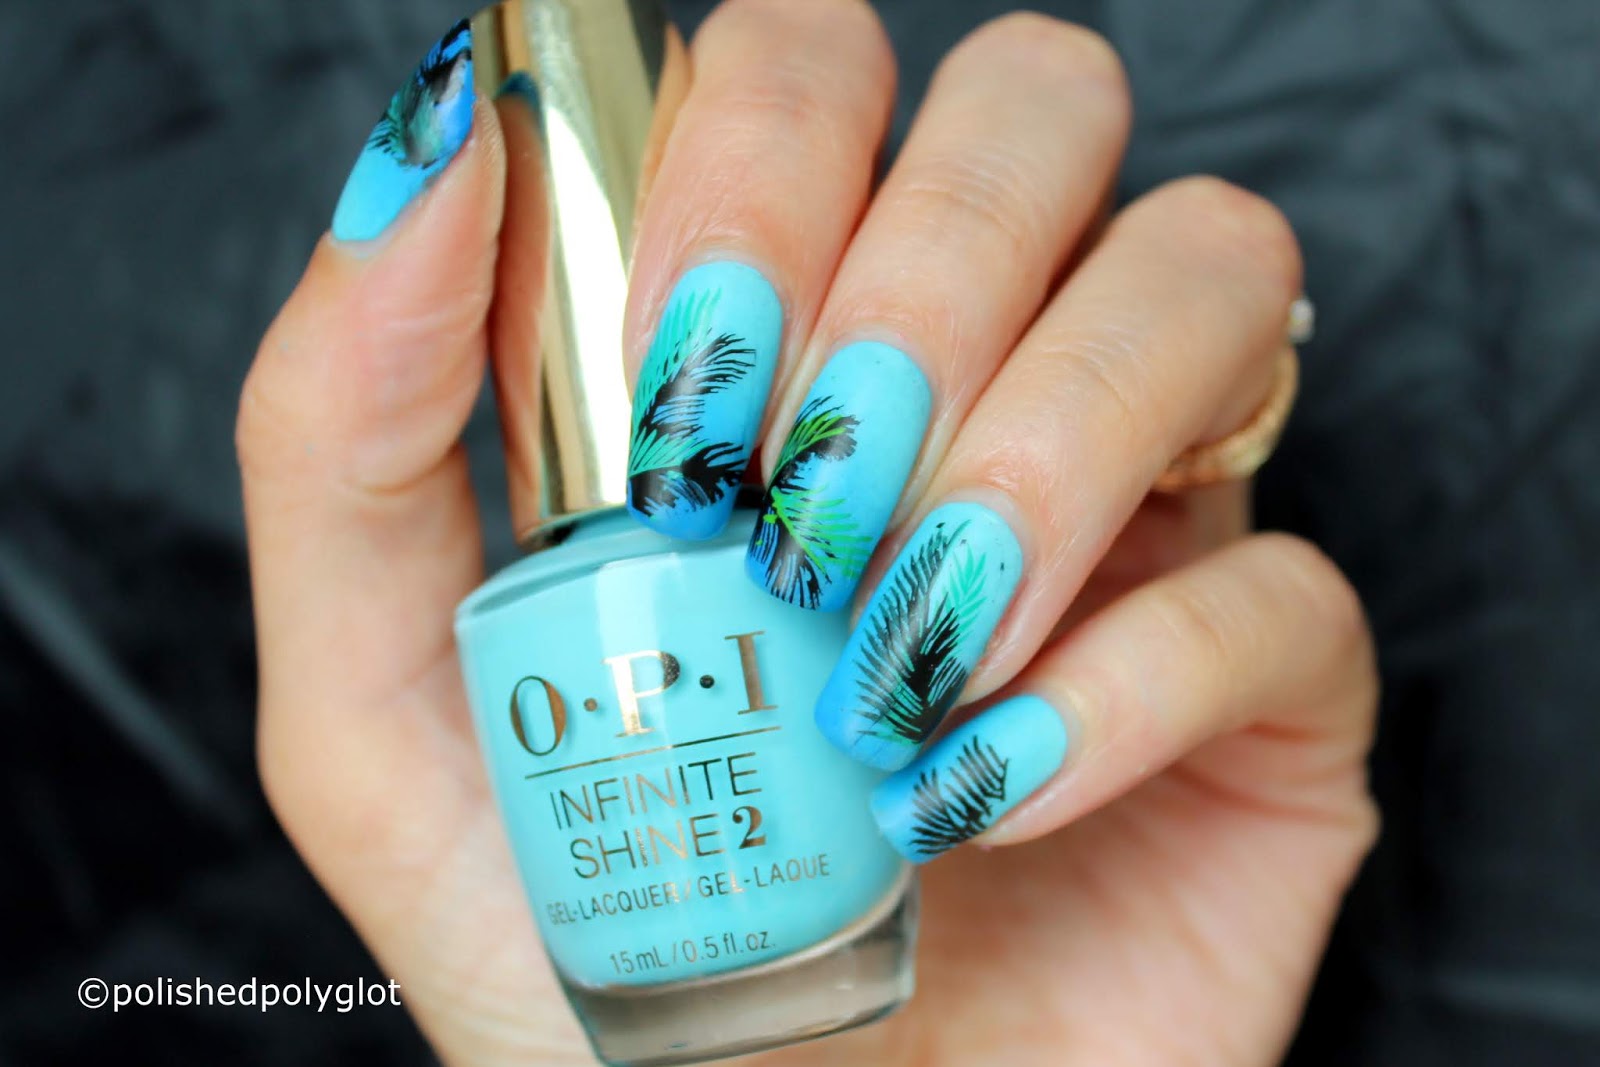 3. "Tropical vacation nail design for a cruise" - wide 10